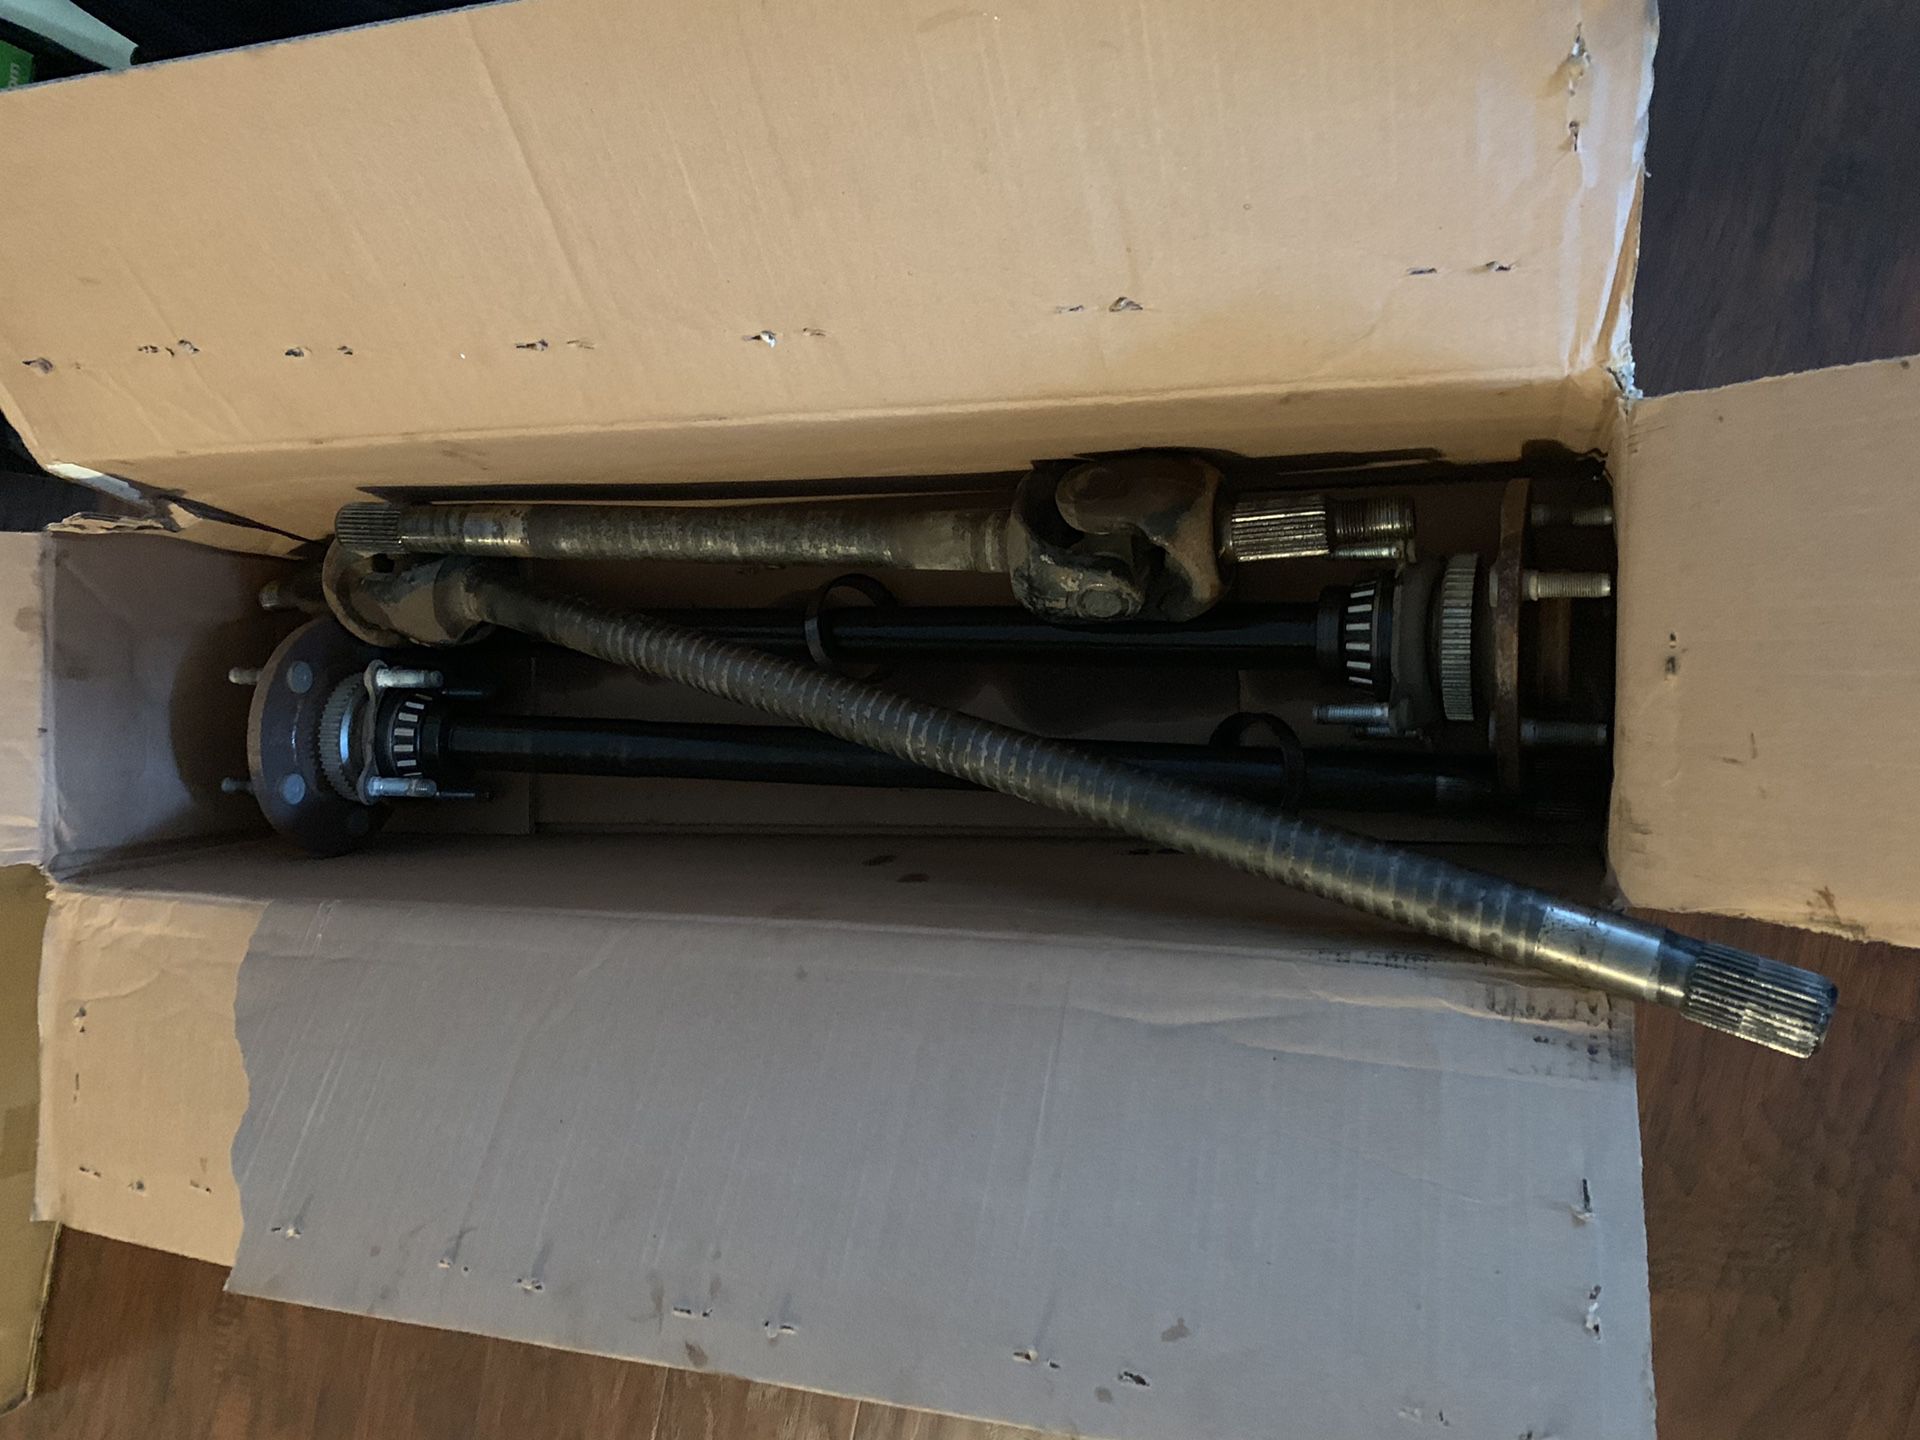 Jeep JKU stock axle shafts (front and rear) - Rubicon